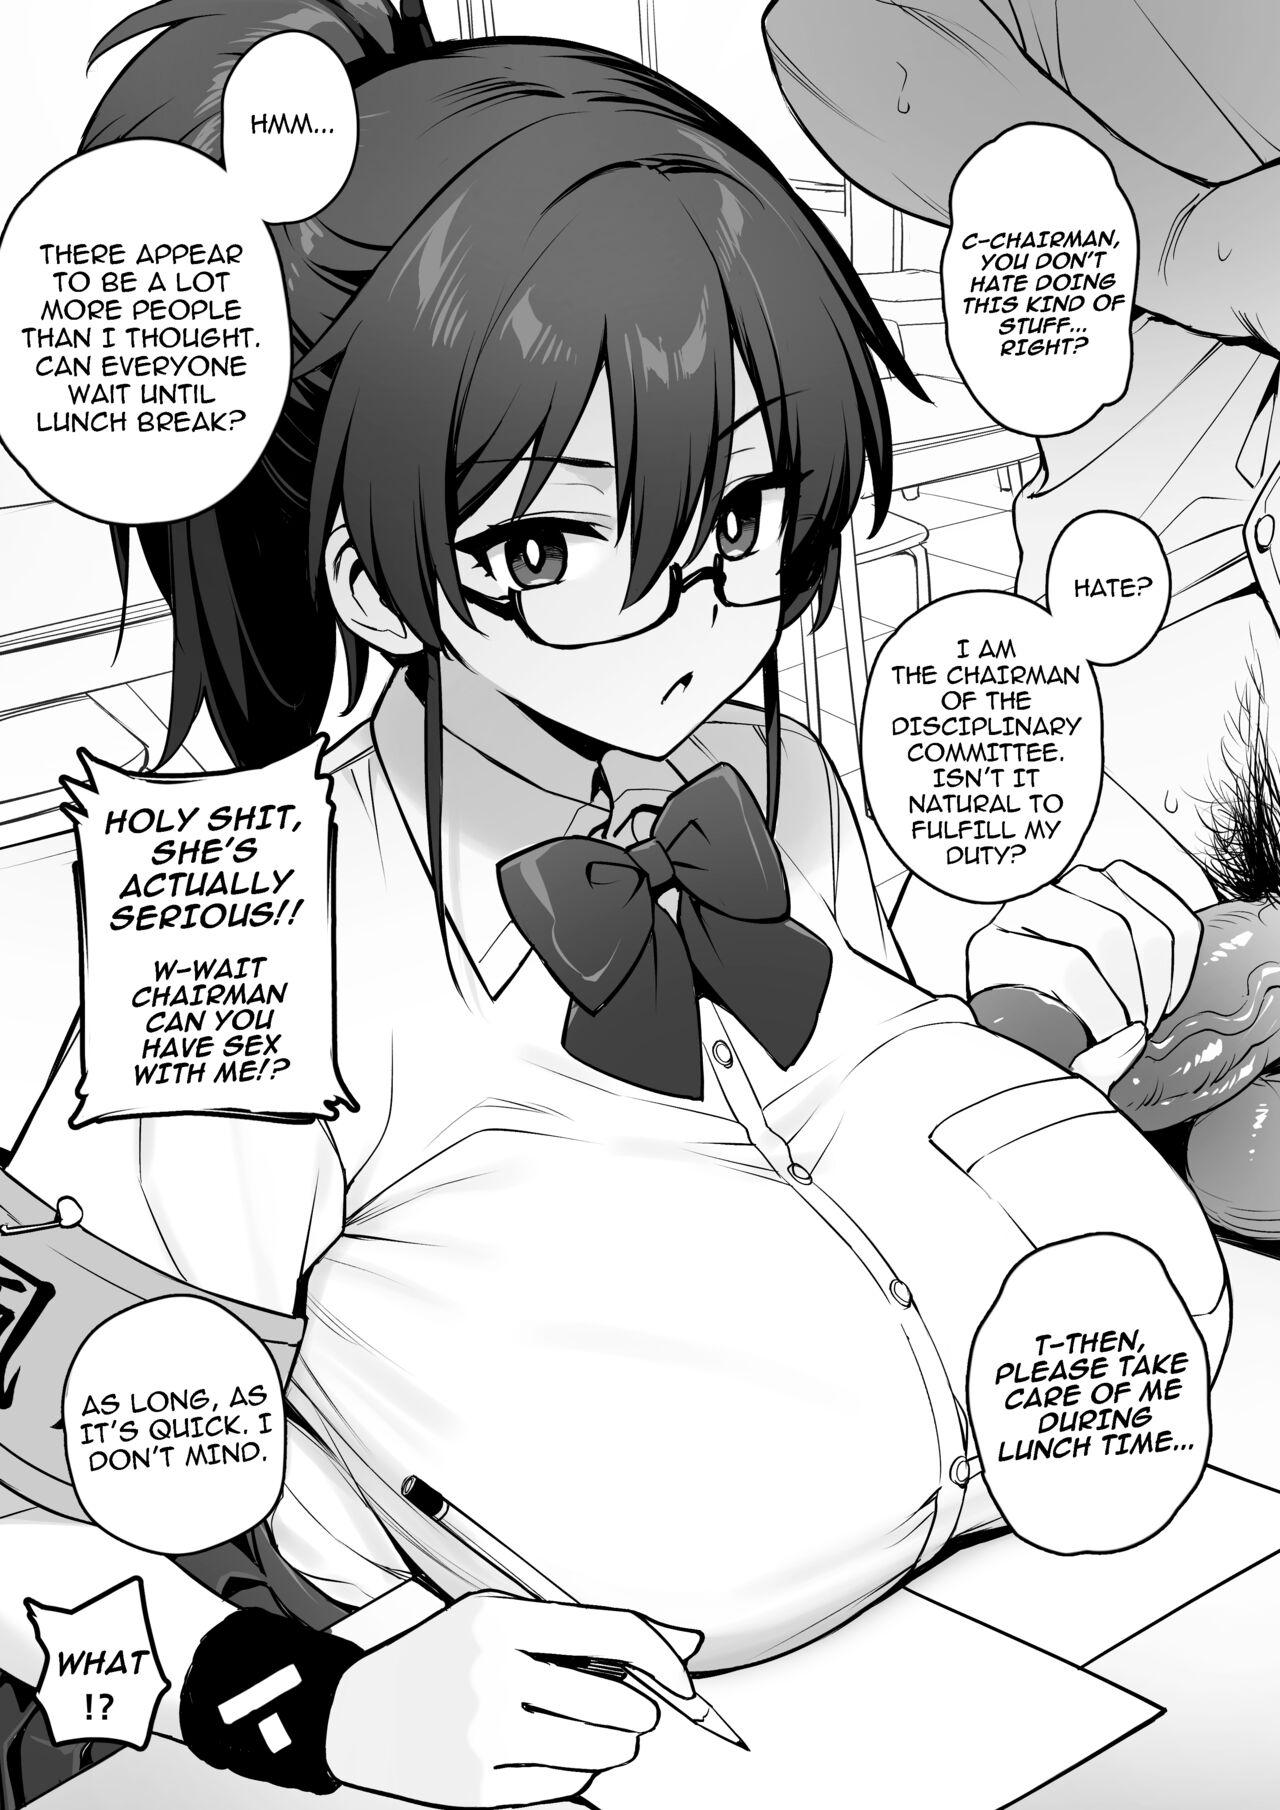 Costume Rumor Has It That The New Chairman of Disciplinary Committee Has Huge Breasts. - Original Gostosas - Page 8